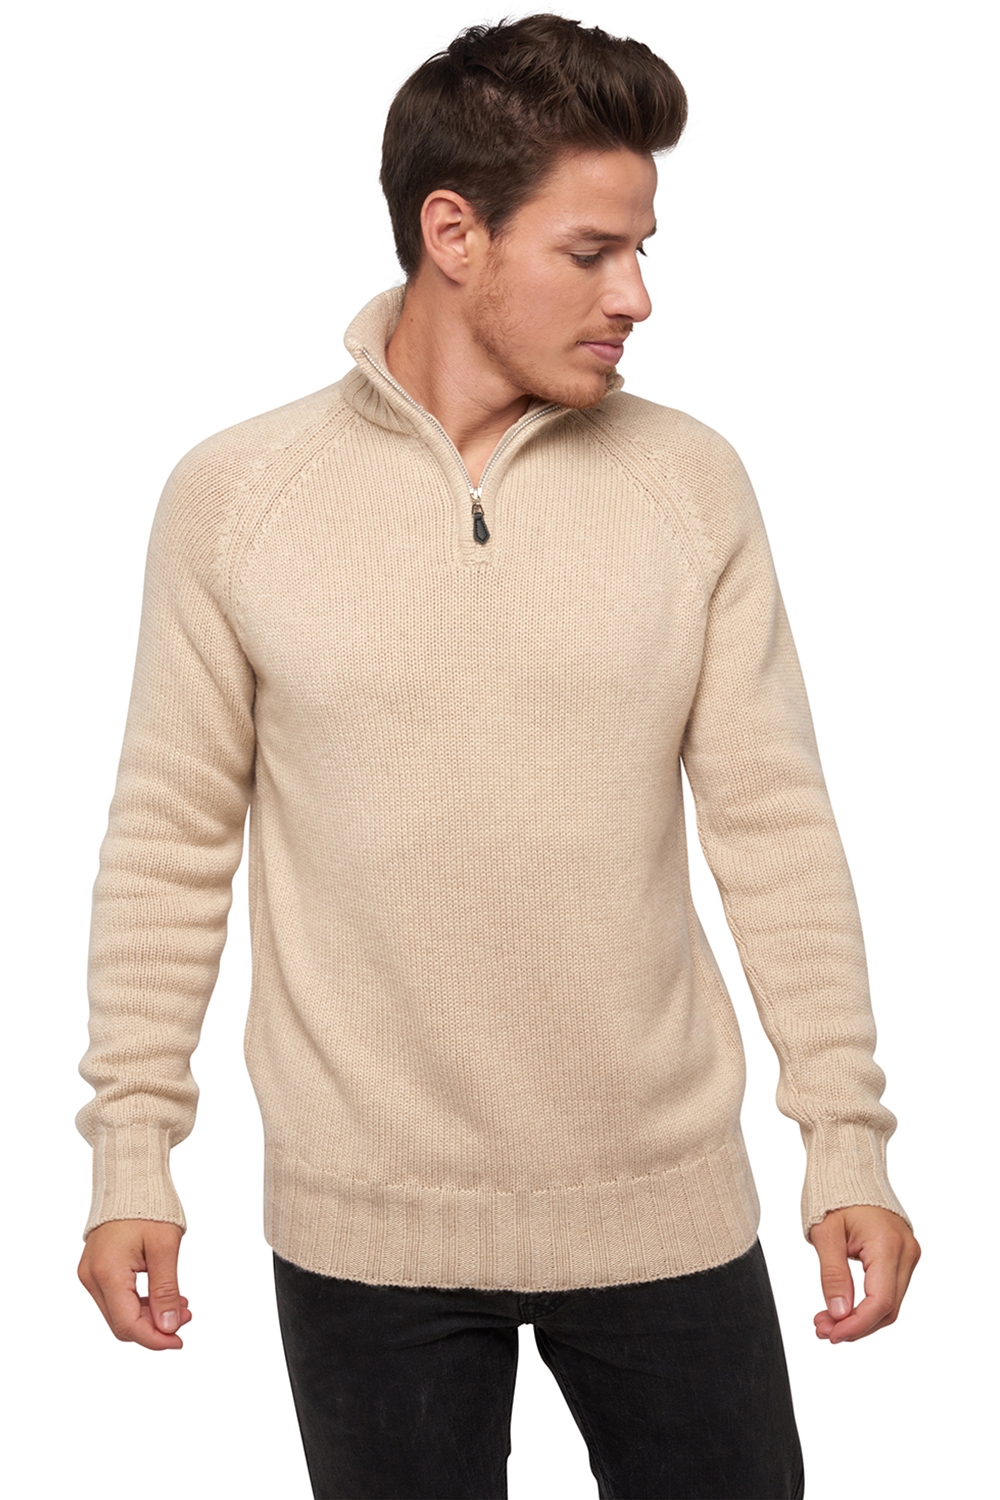  men chunky sweater natural viero natural beige 2xl